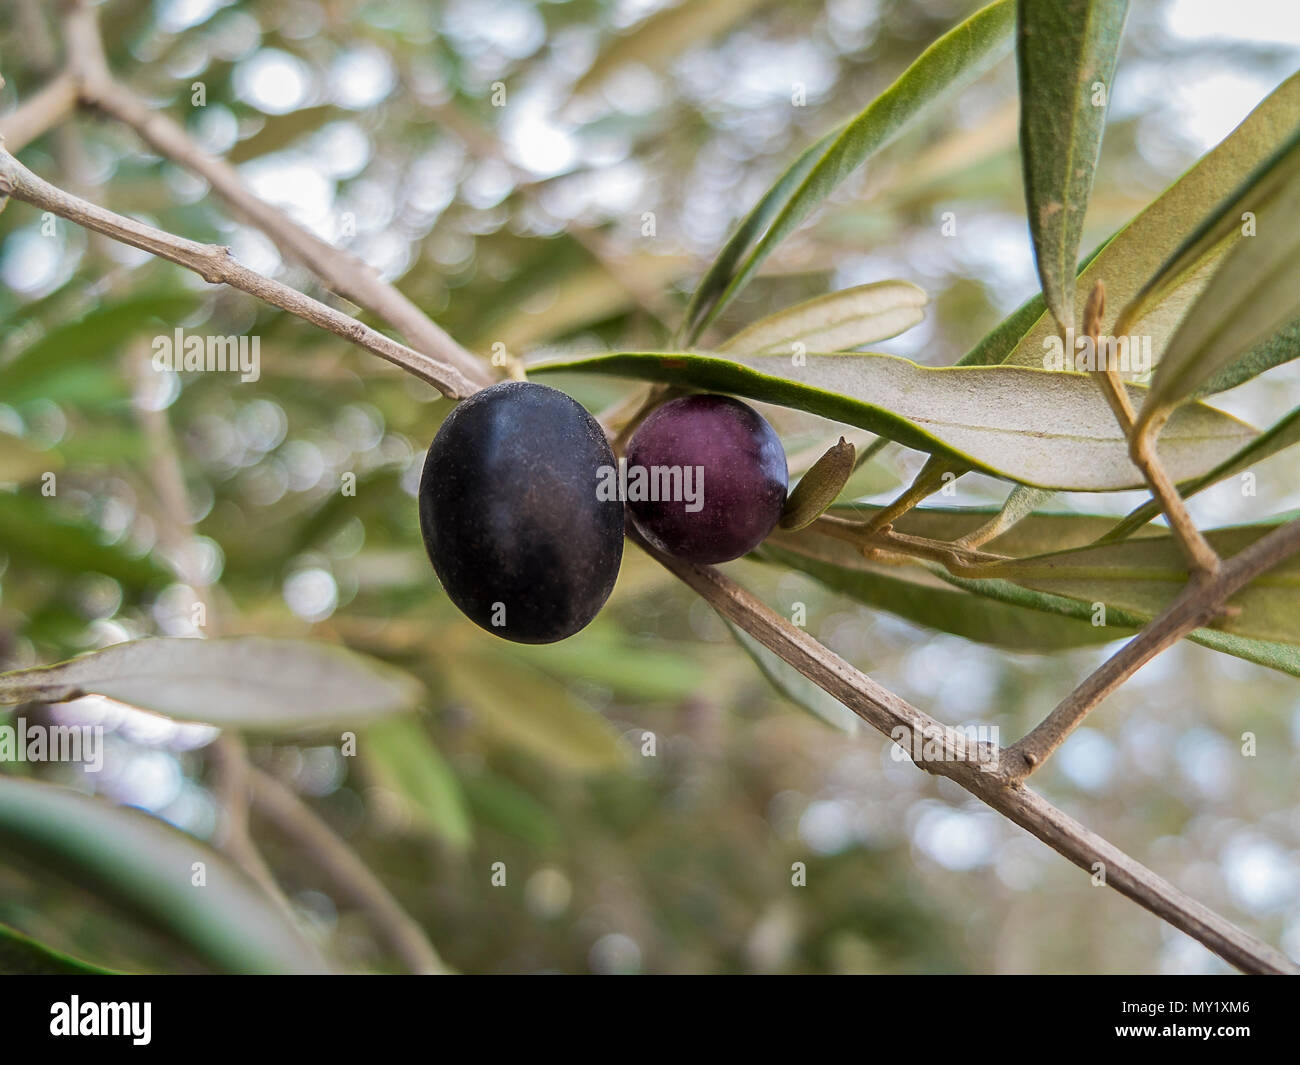 Black and red olives on the tree branch with foliage as background Stock Photo